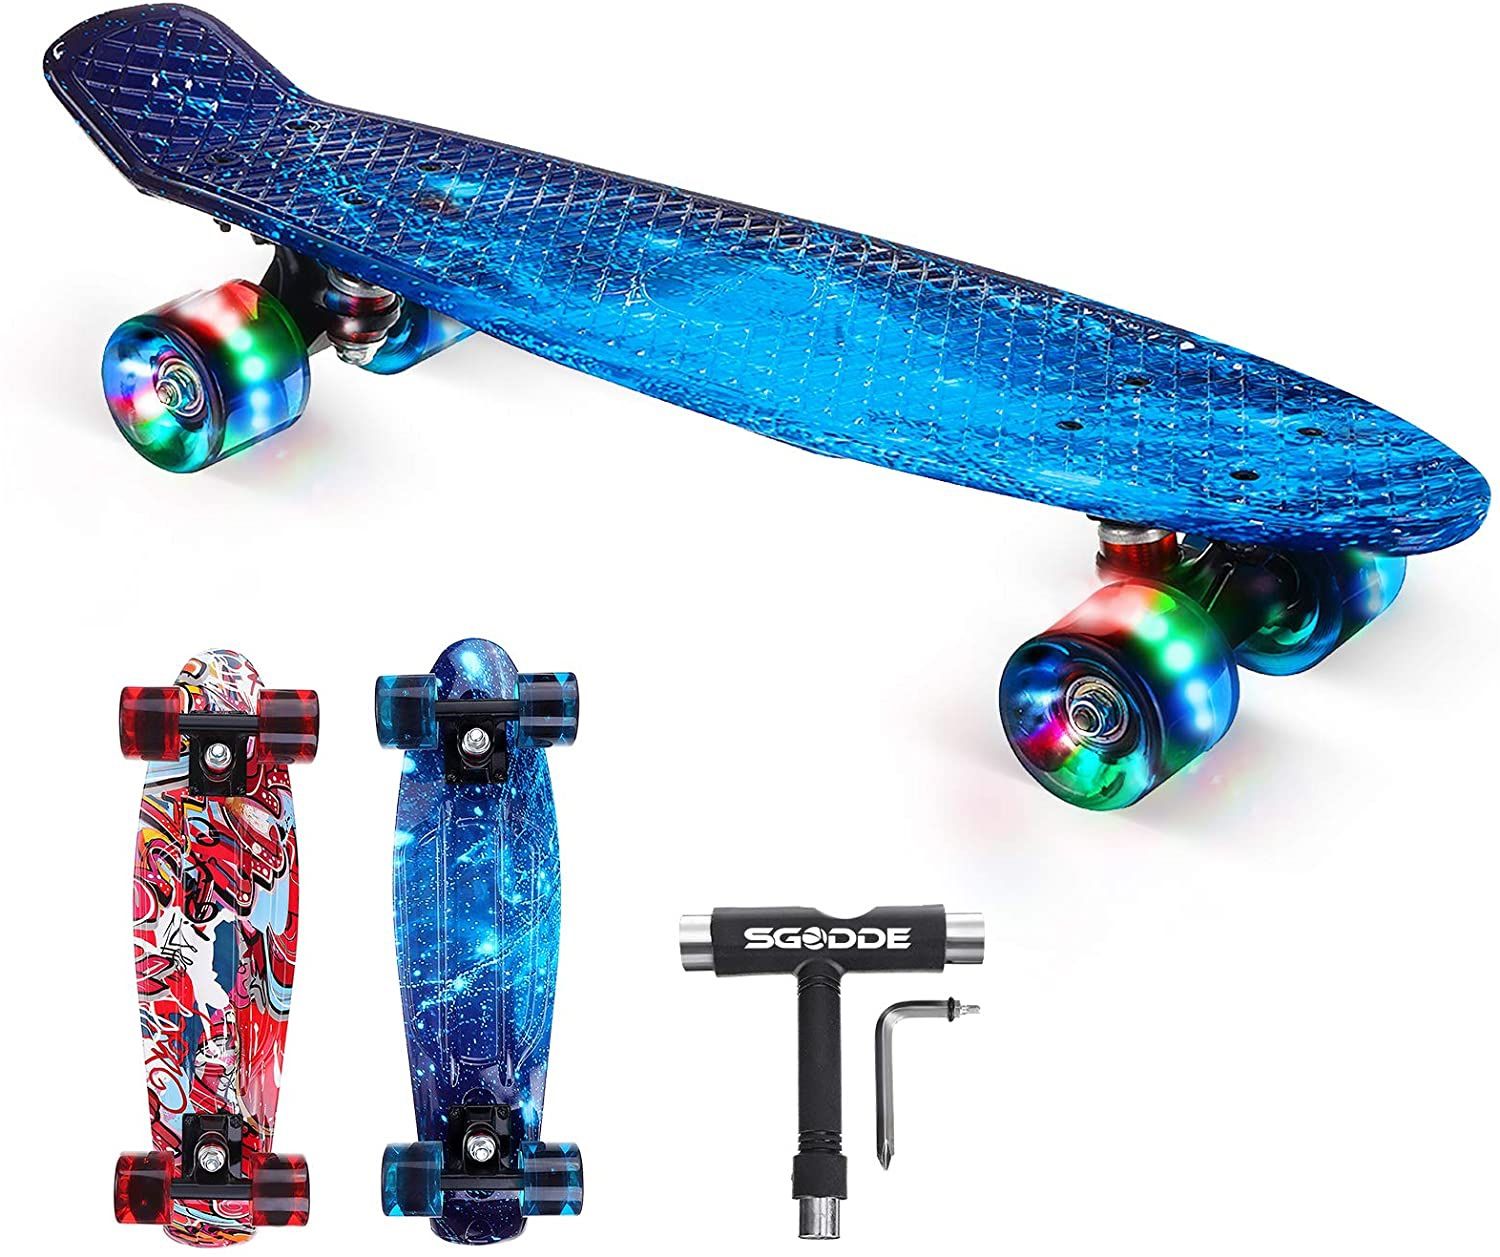 Skateboard 22 inch Mini Cruiser Penny Board with LED Light Up Wheels